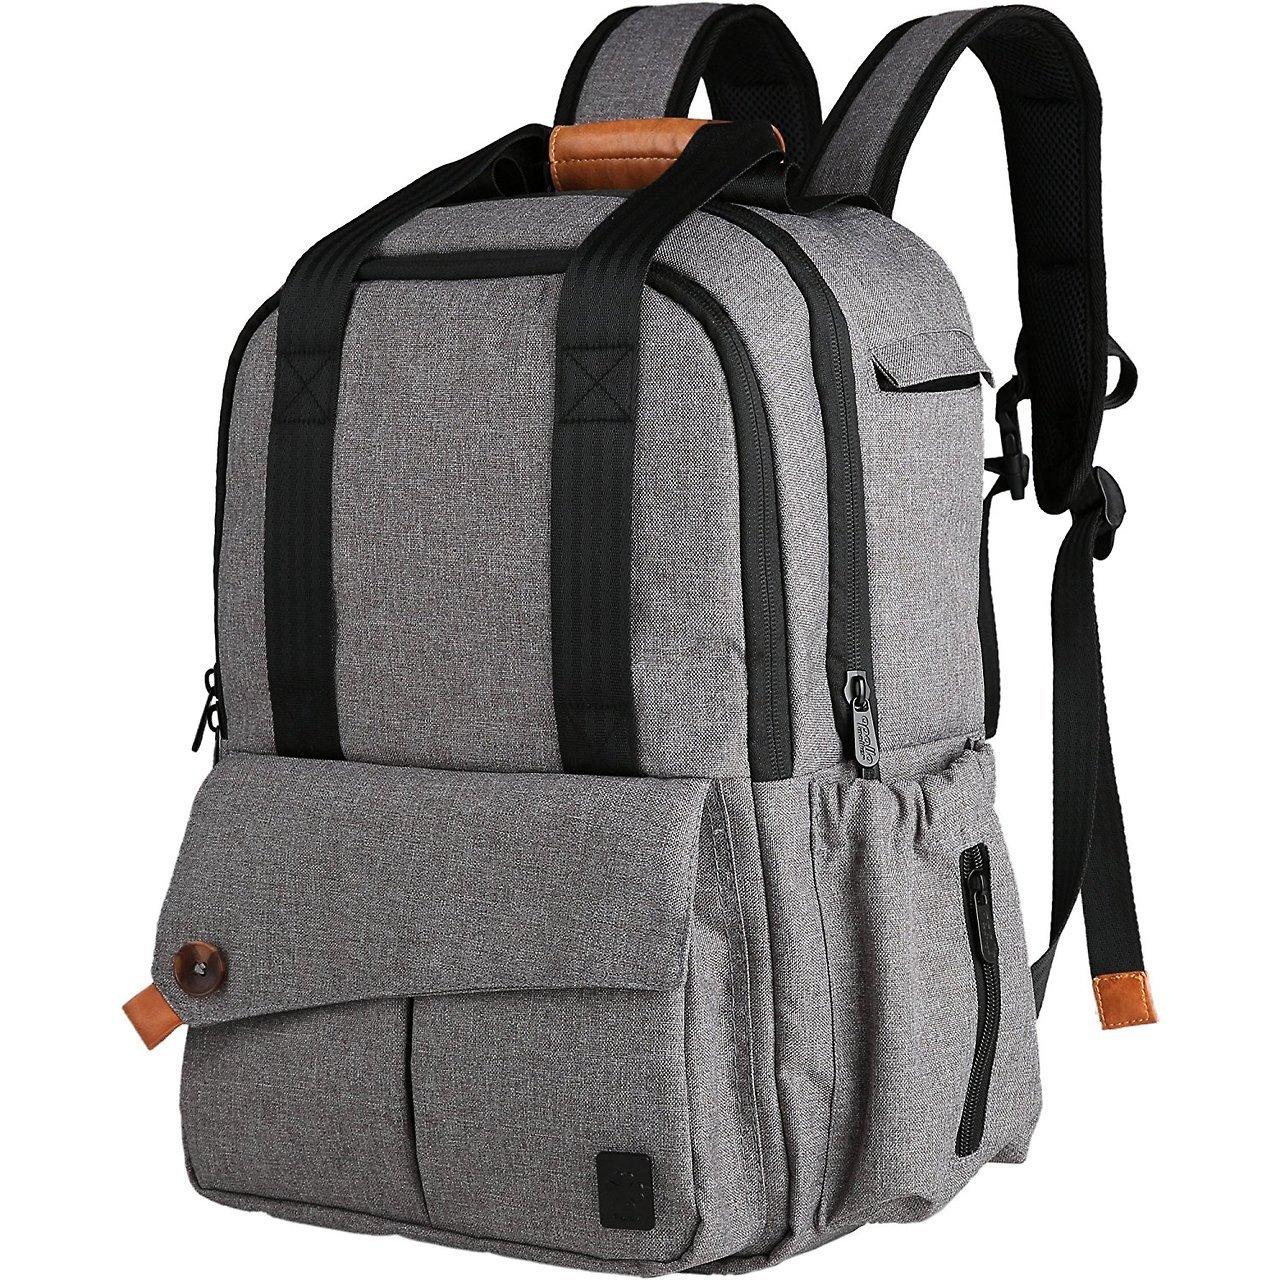 almostdrchelsearar — This is one of the Top Rated Diaper Bags Backpack...